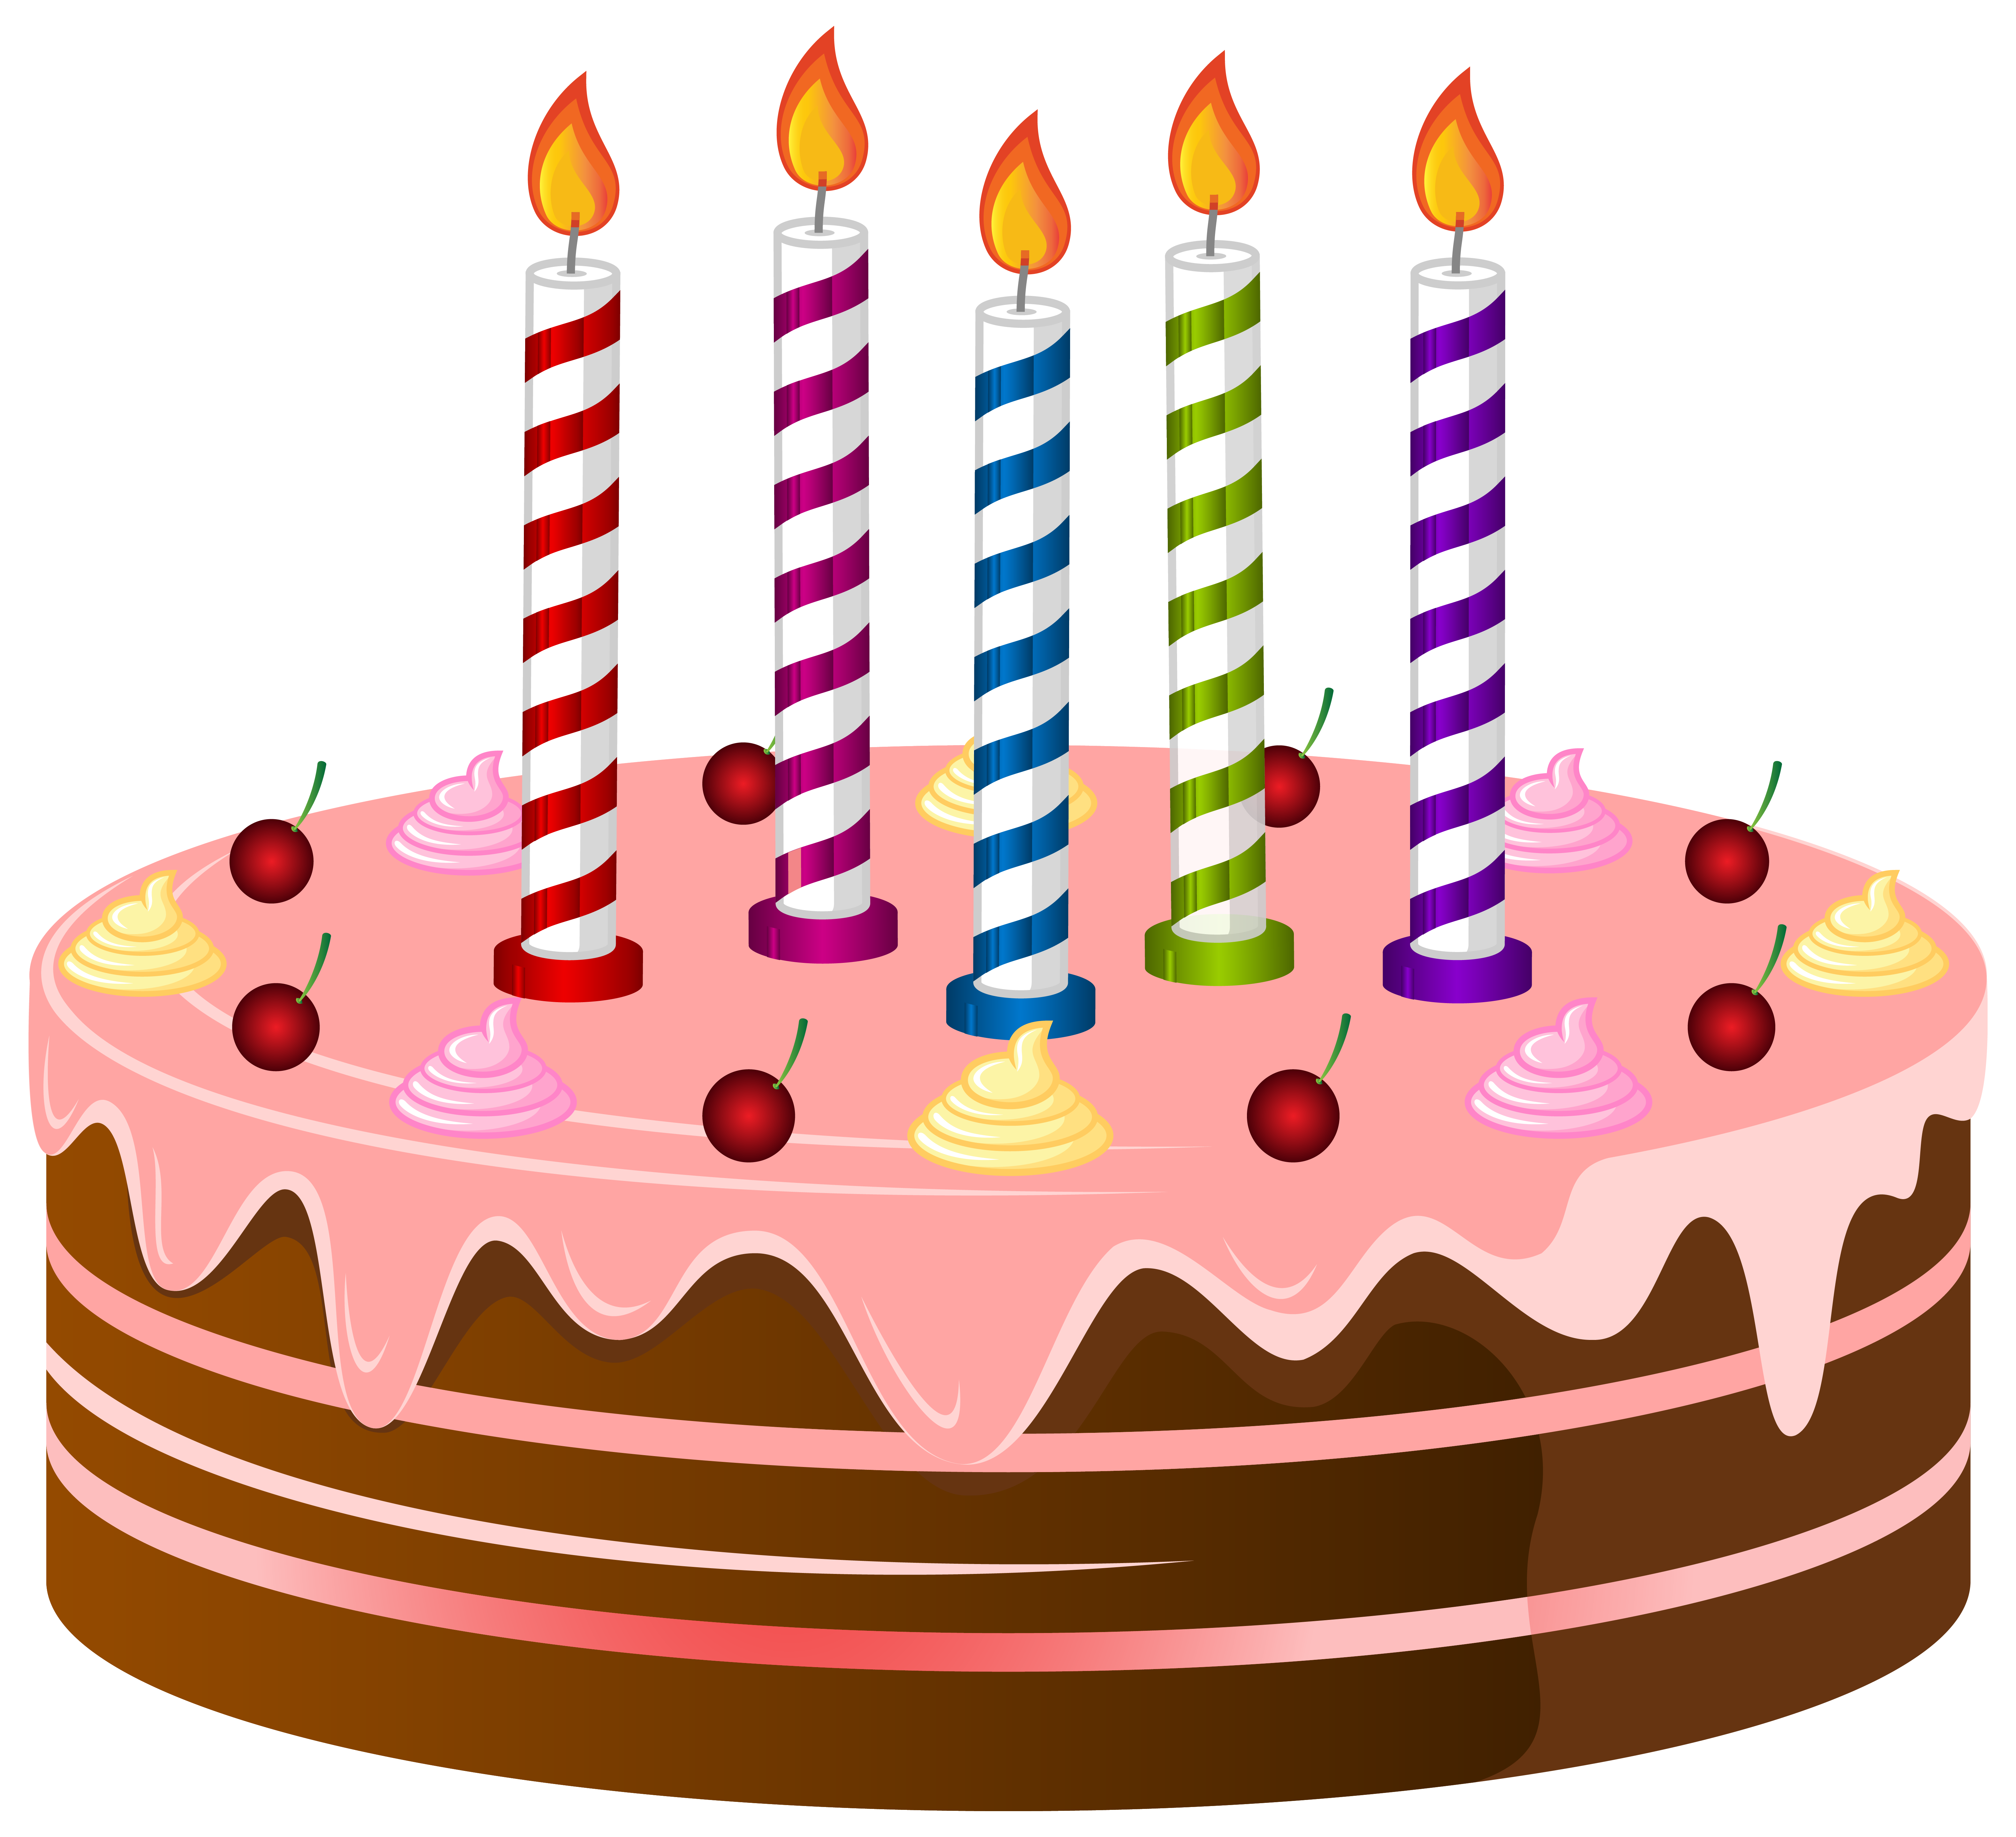 Birthday cake clip art free clipart images 2 clipartcow - Clipartix